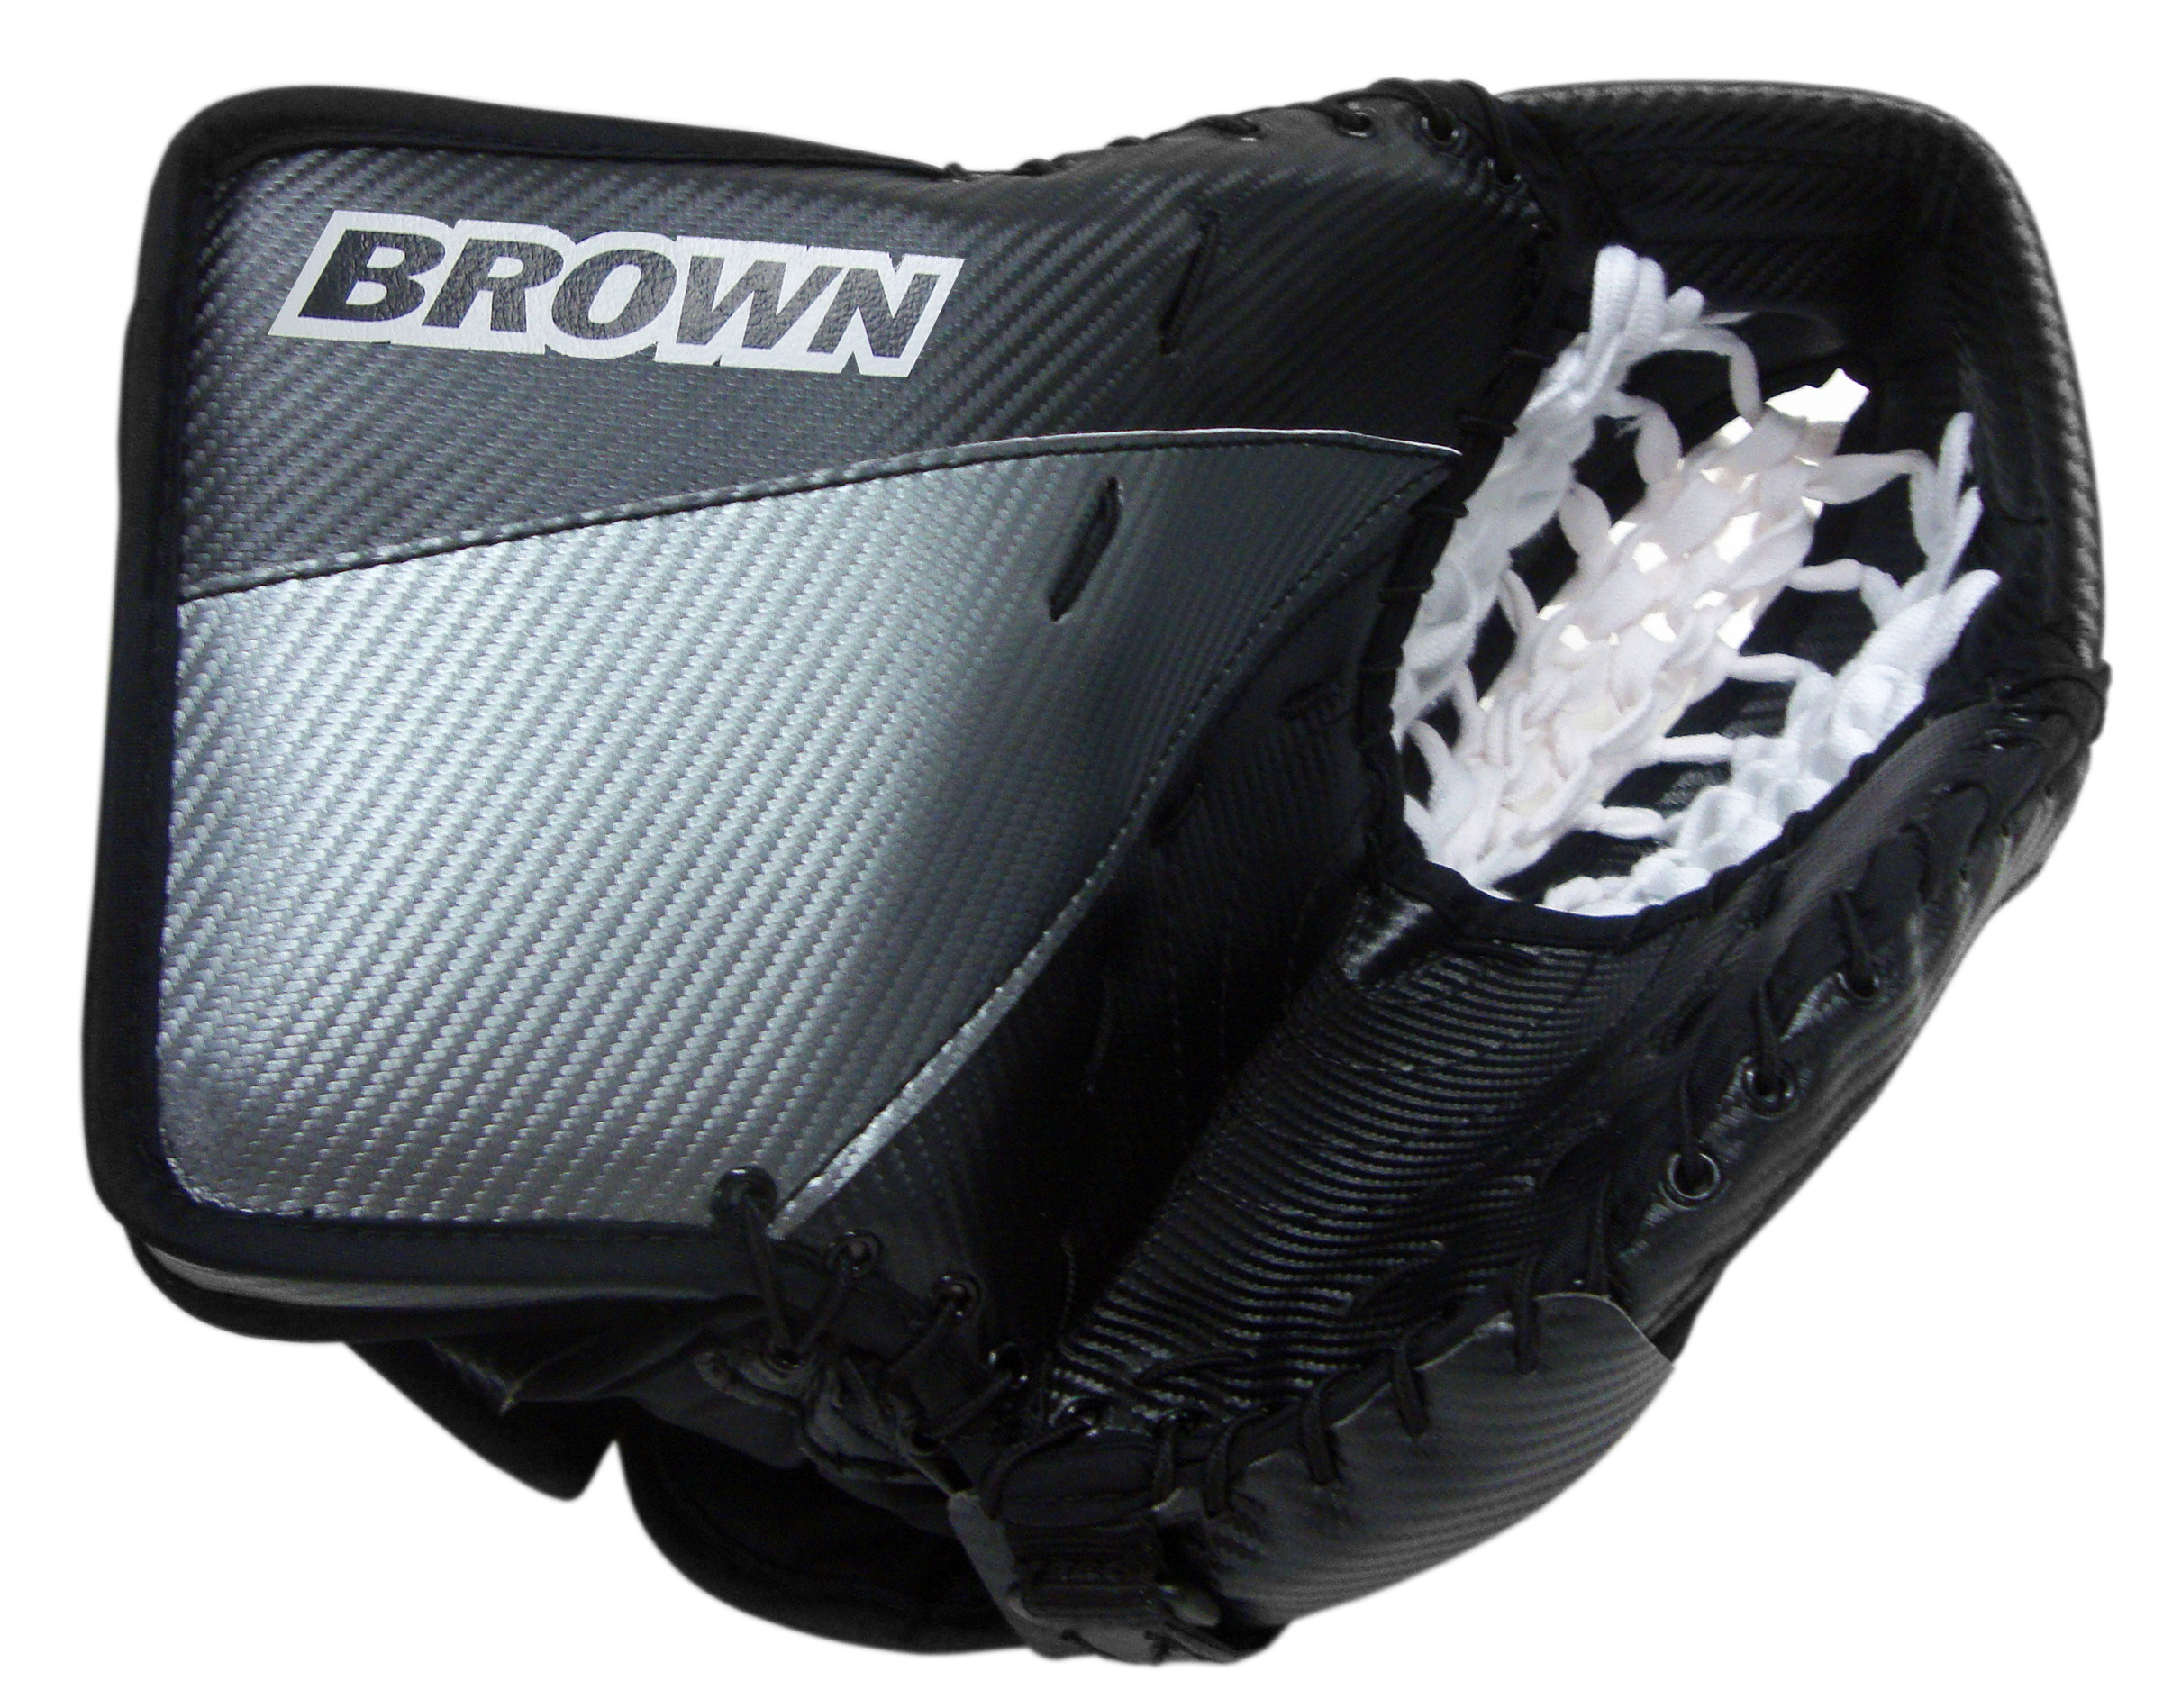 2500 black and stainless steel catch glove